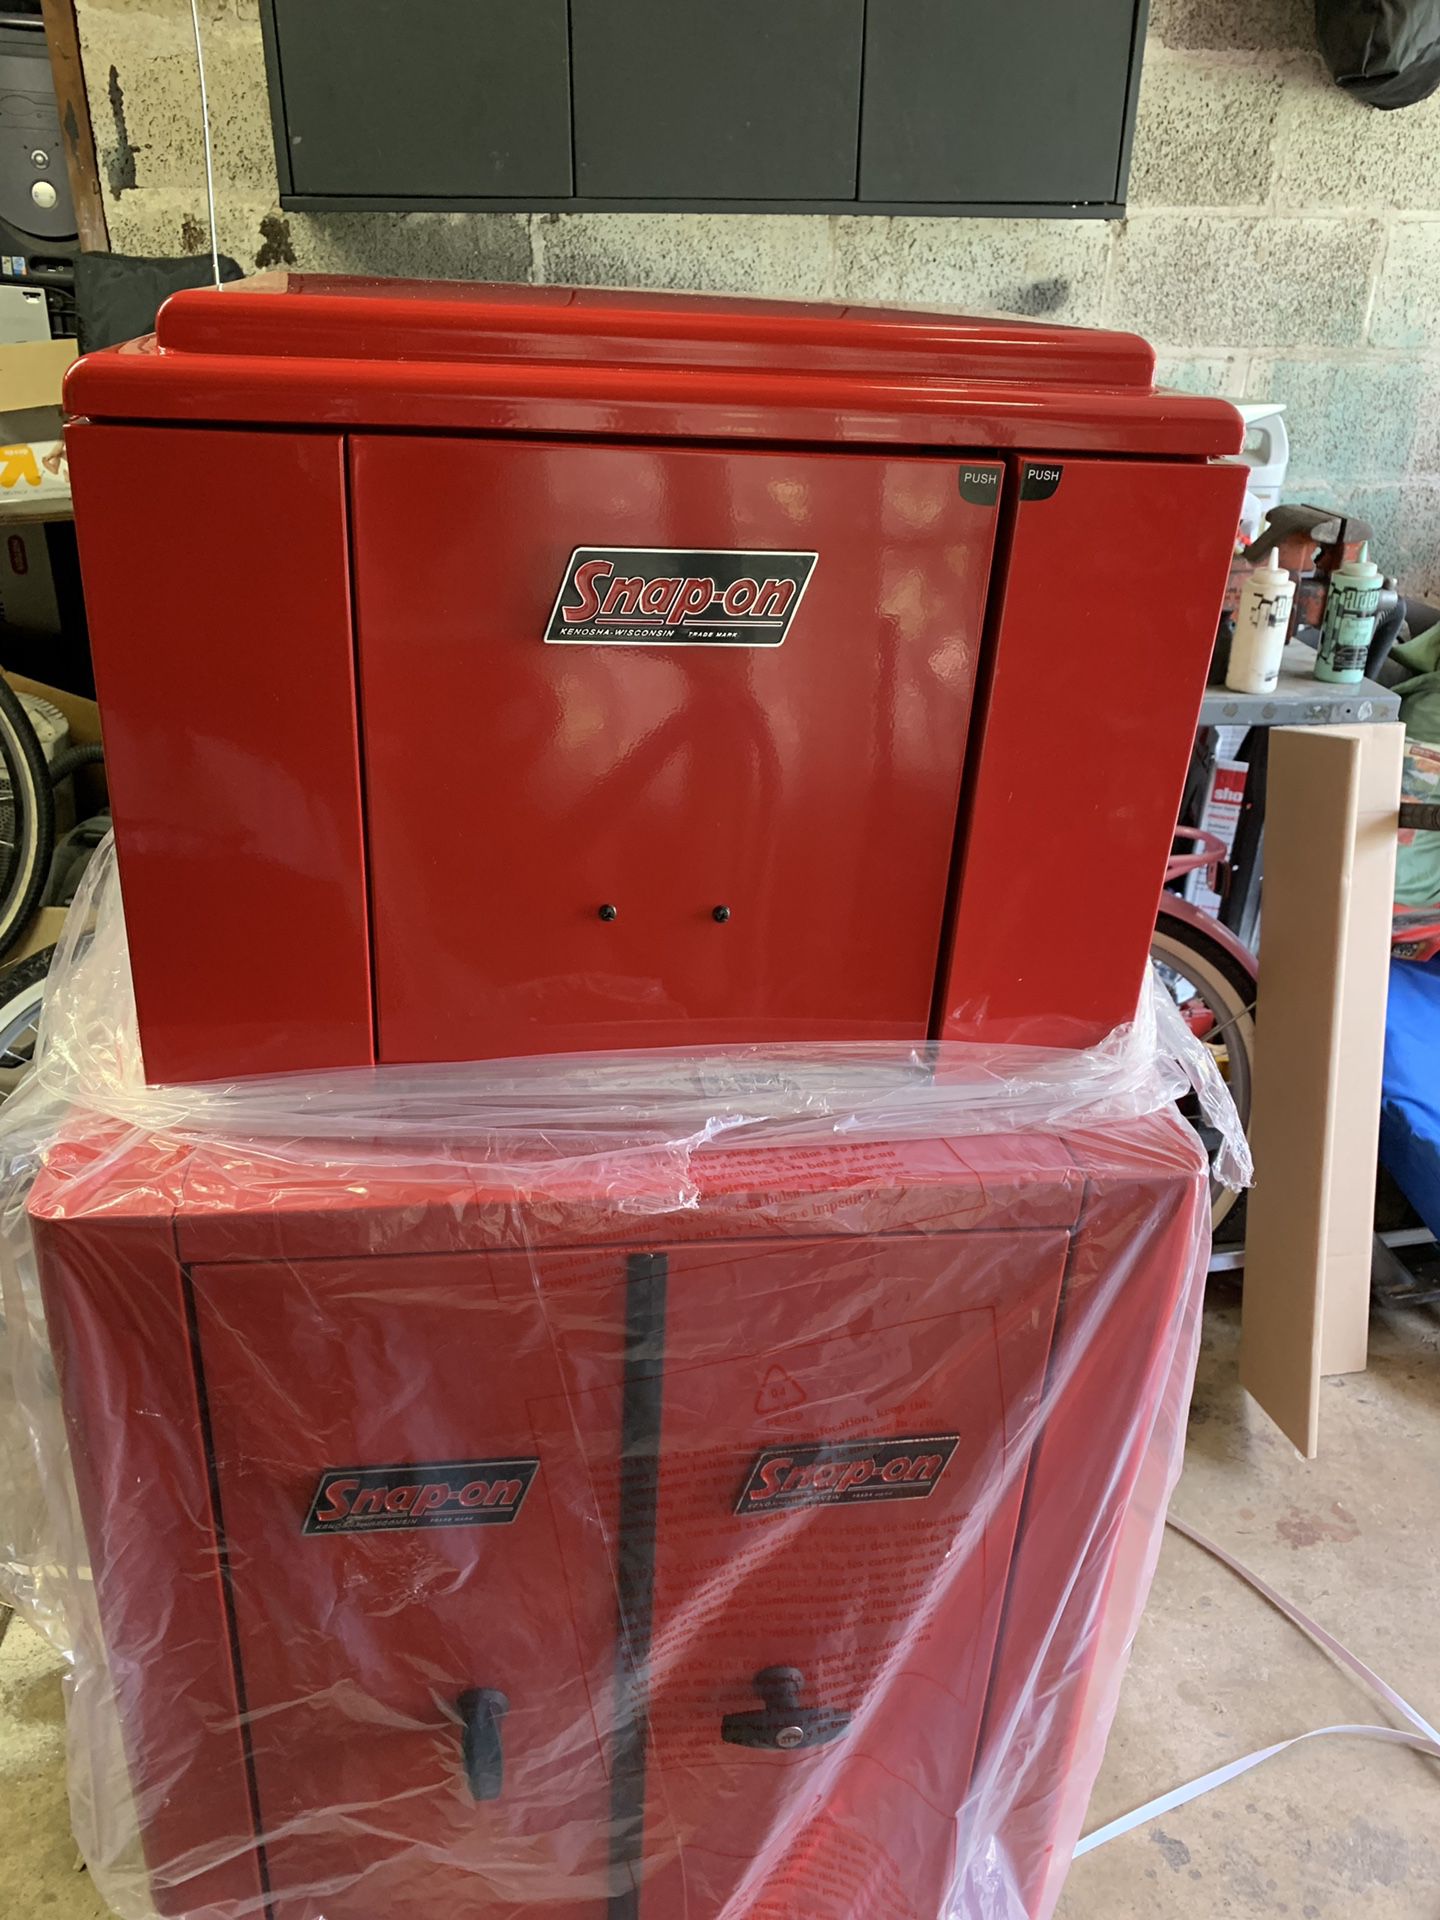 Snap on fridge and microwave